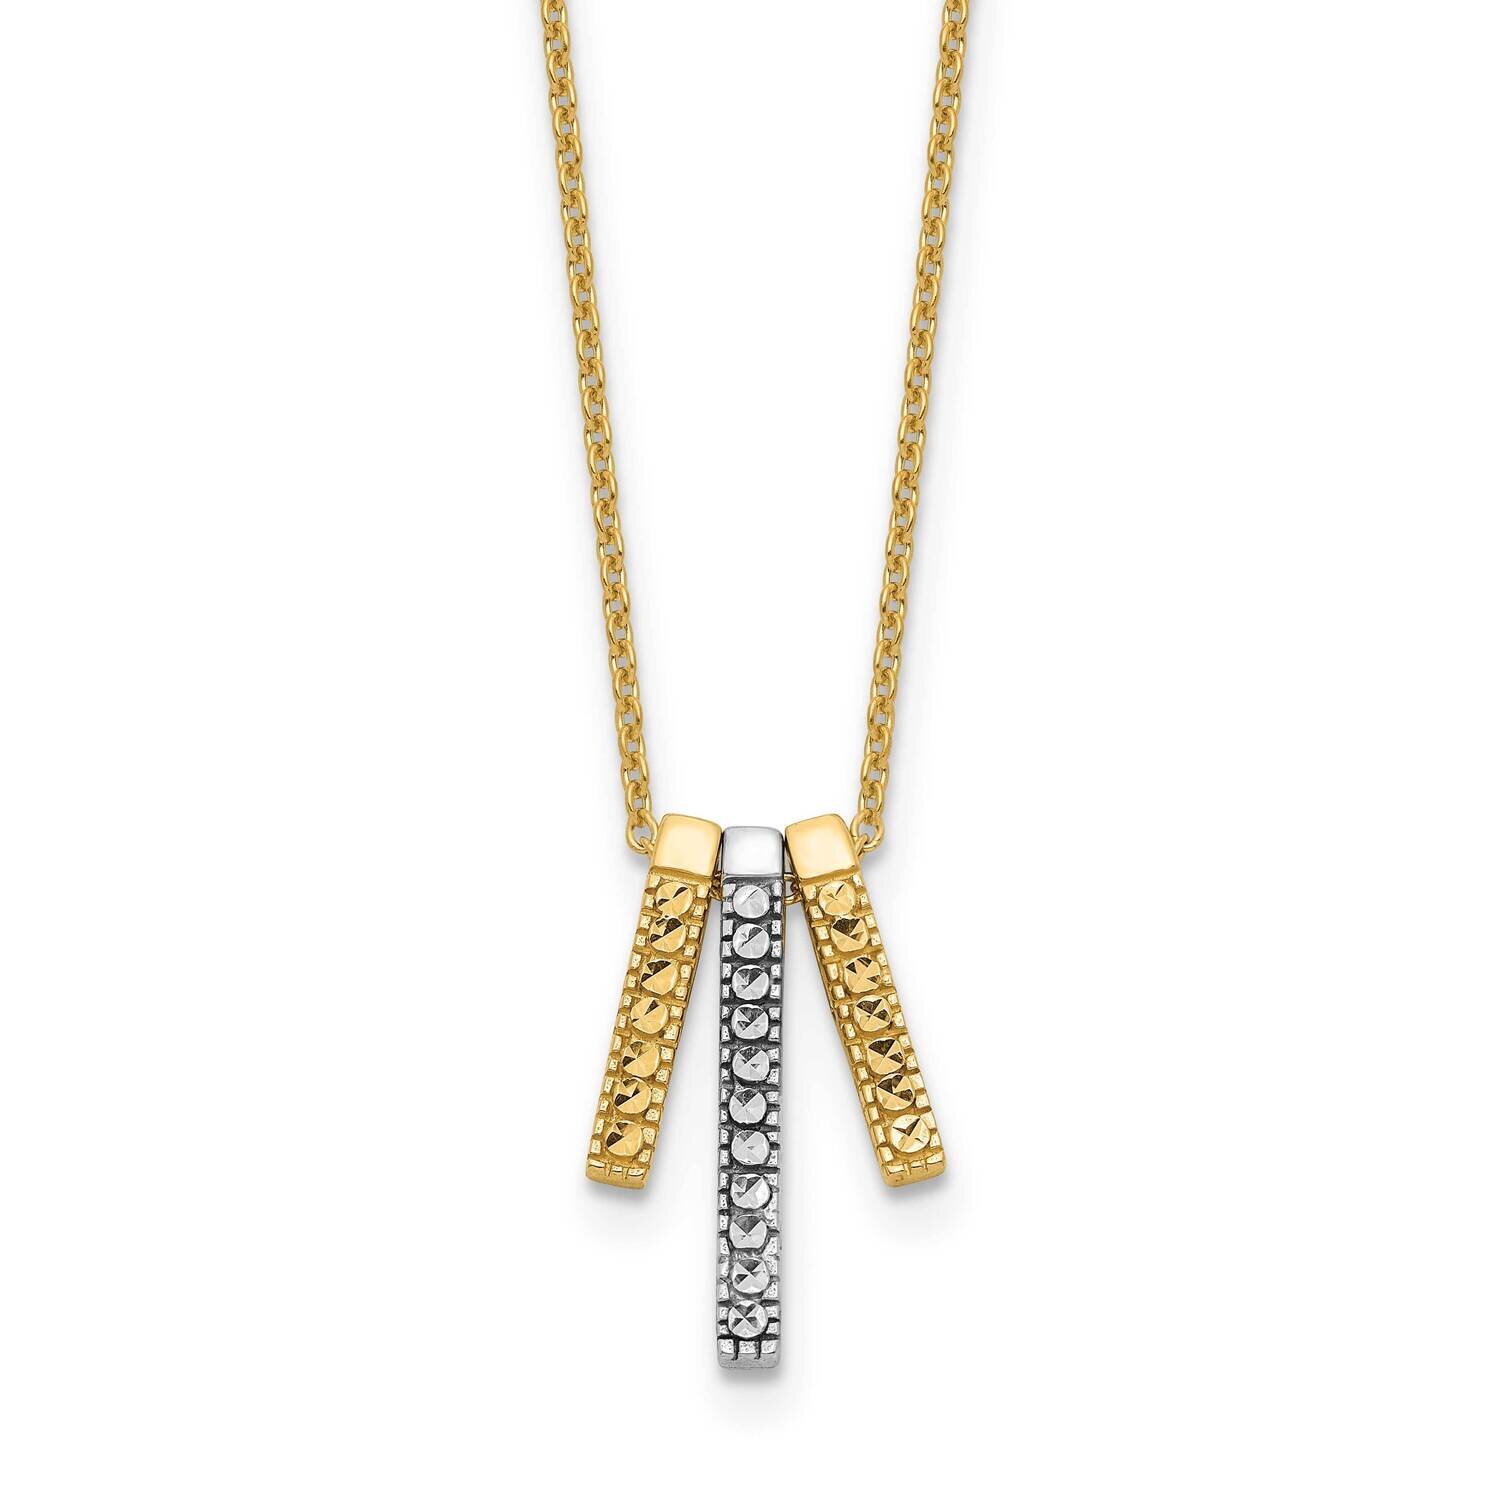 Diamond-Cut Bars 17 Inch Necklace 14k Two-Tone Gold Polished SF2906-17